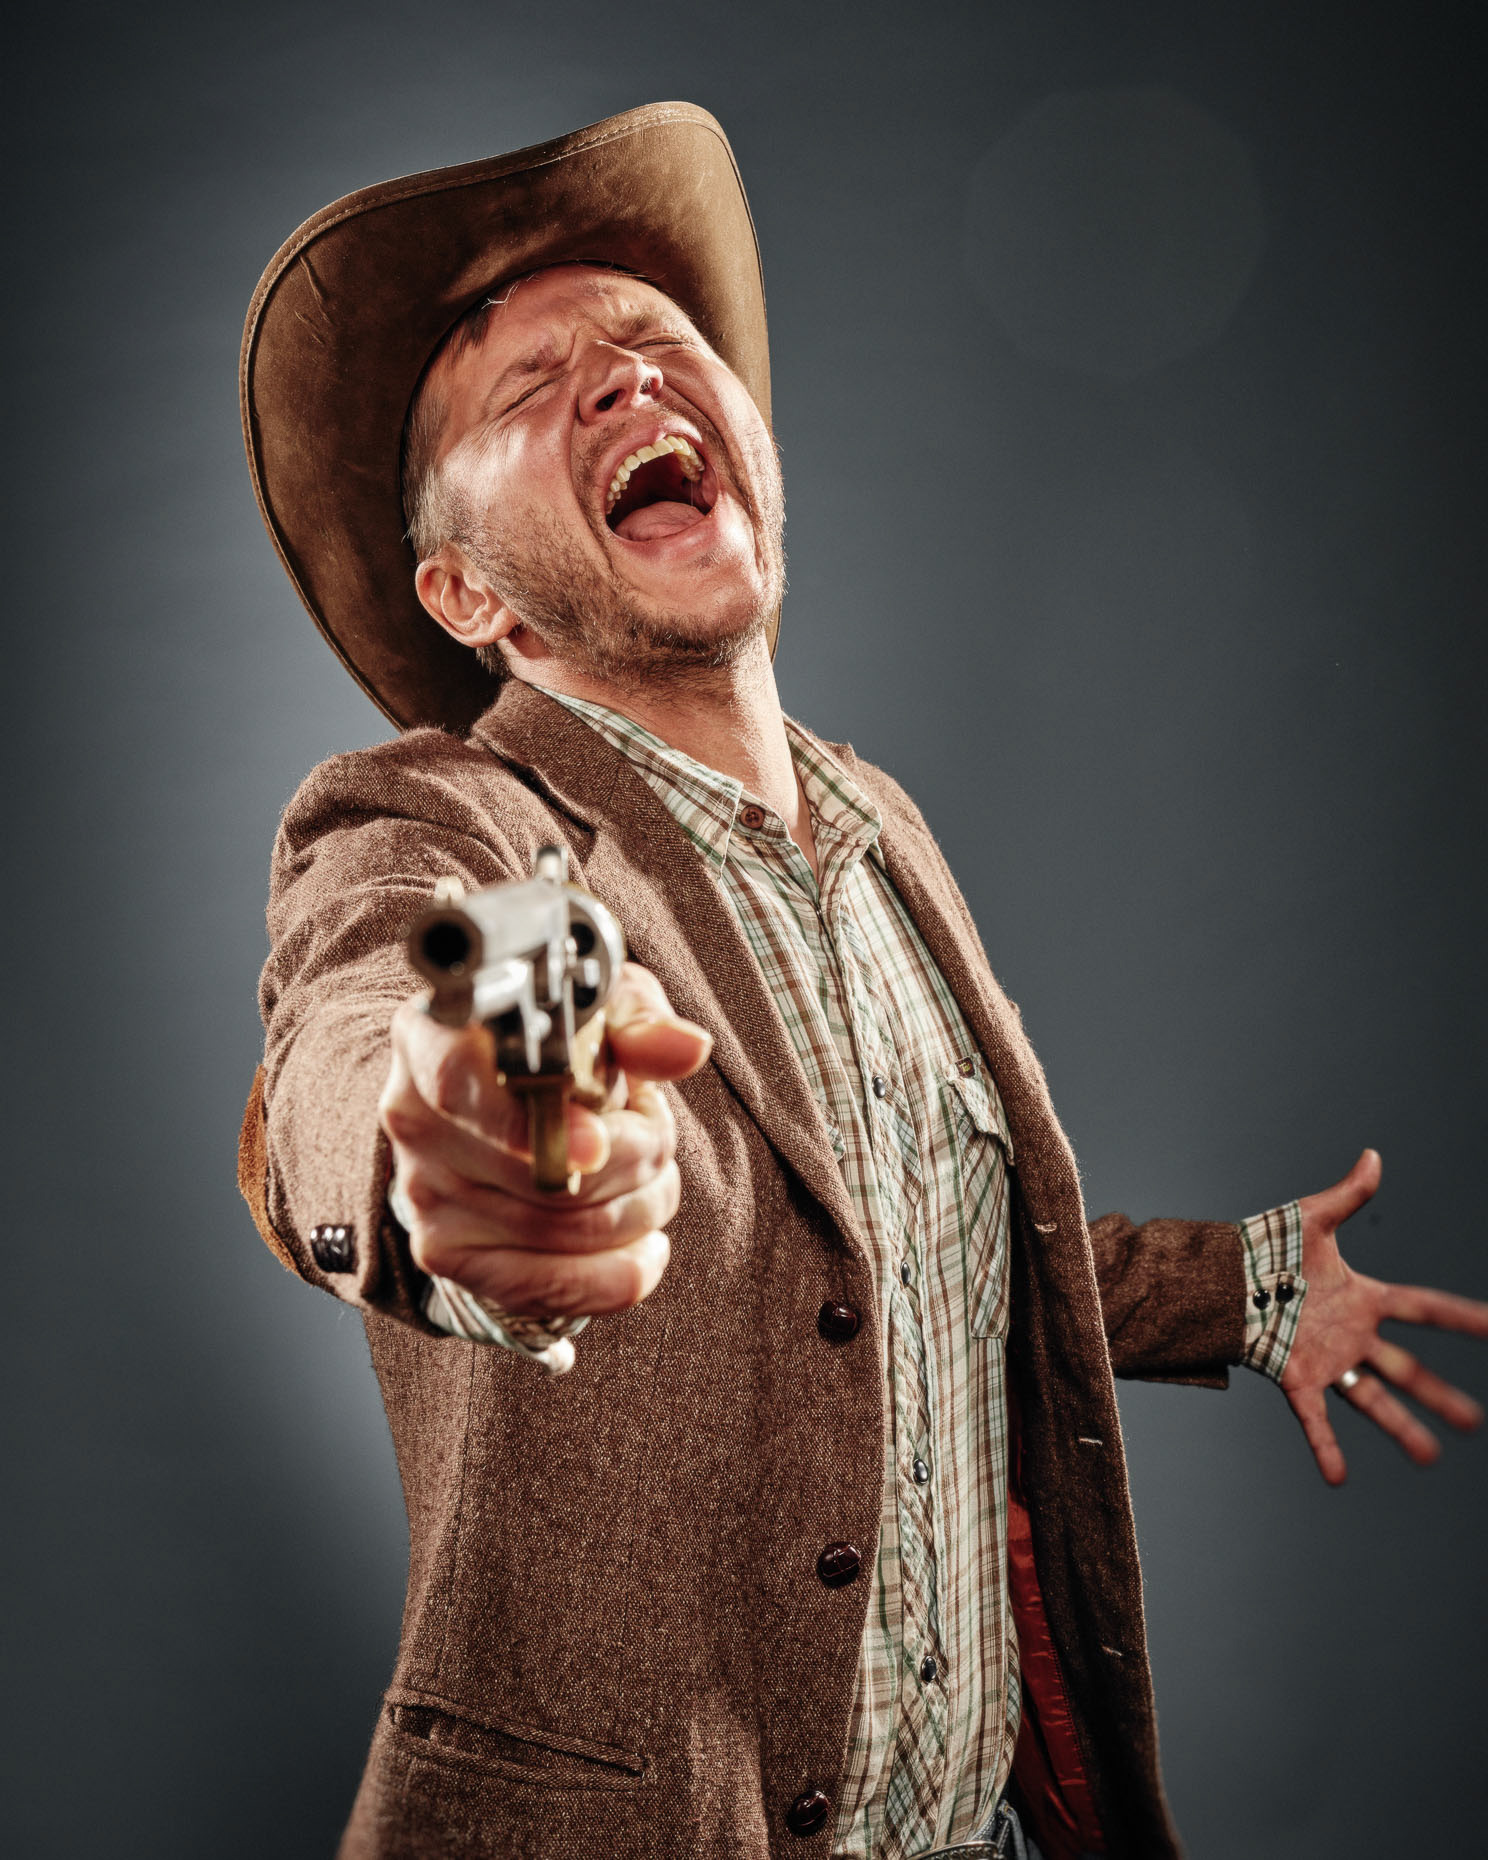 improv actor Nick Condon Curious Comedy Theater Showdown dressed as a cowboy pointing a pistol at the camera and laughing outrageously. Photo by Andy Batt